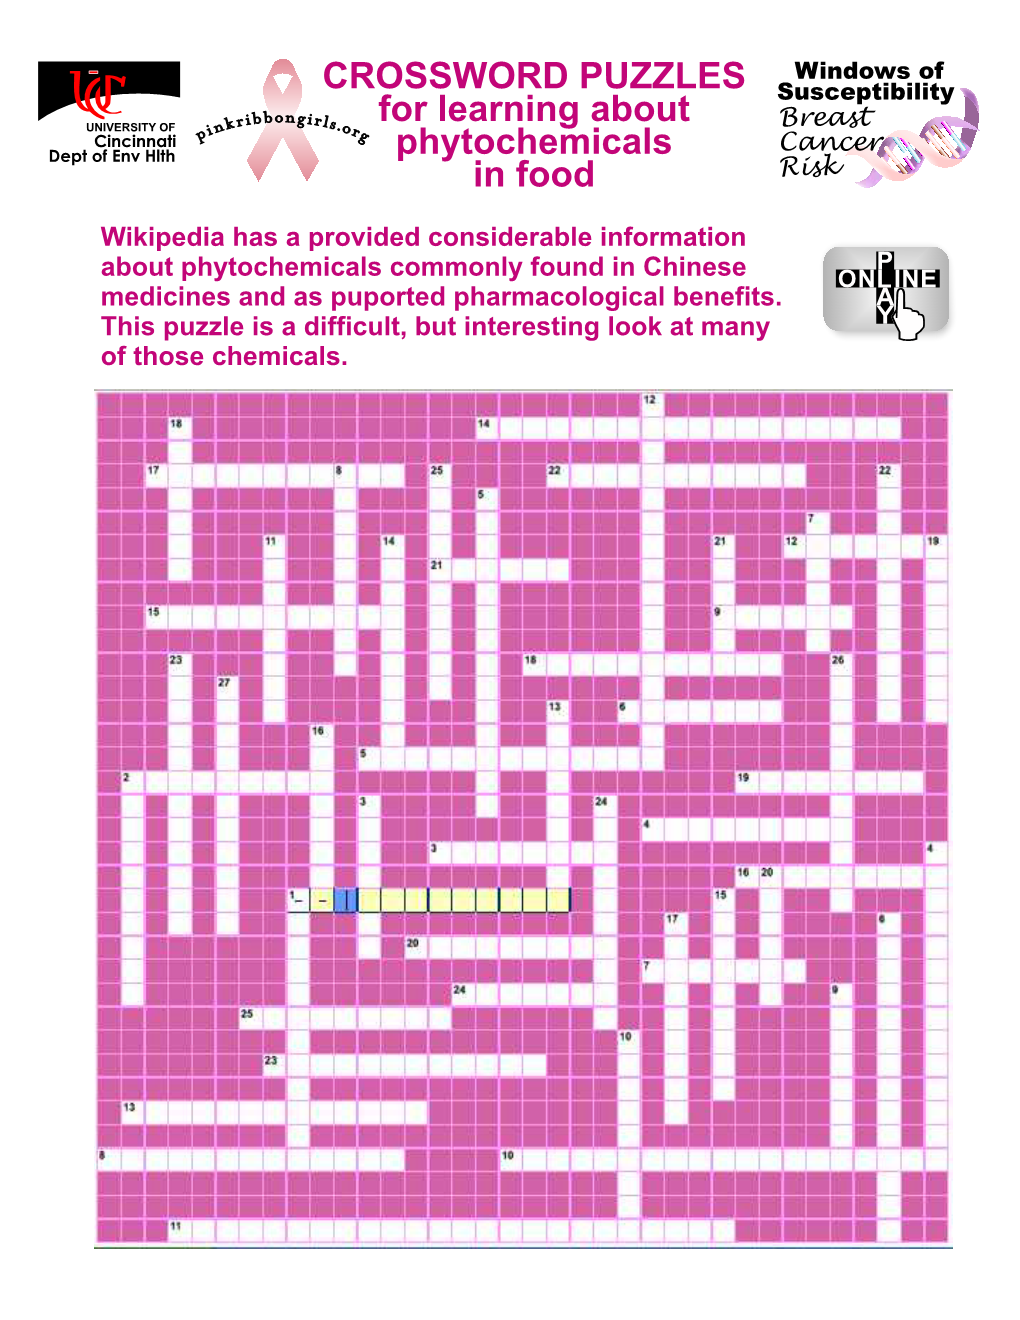 CROSSWORD PUZZLES for Learning About Phytochemicals in Food